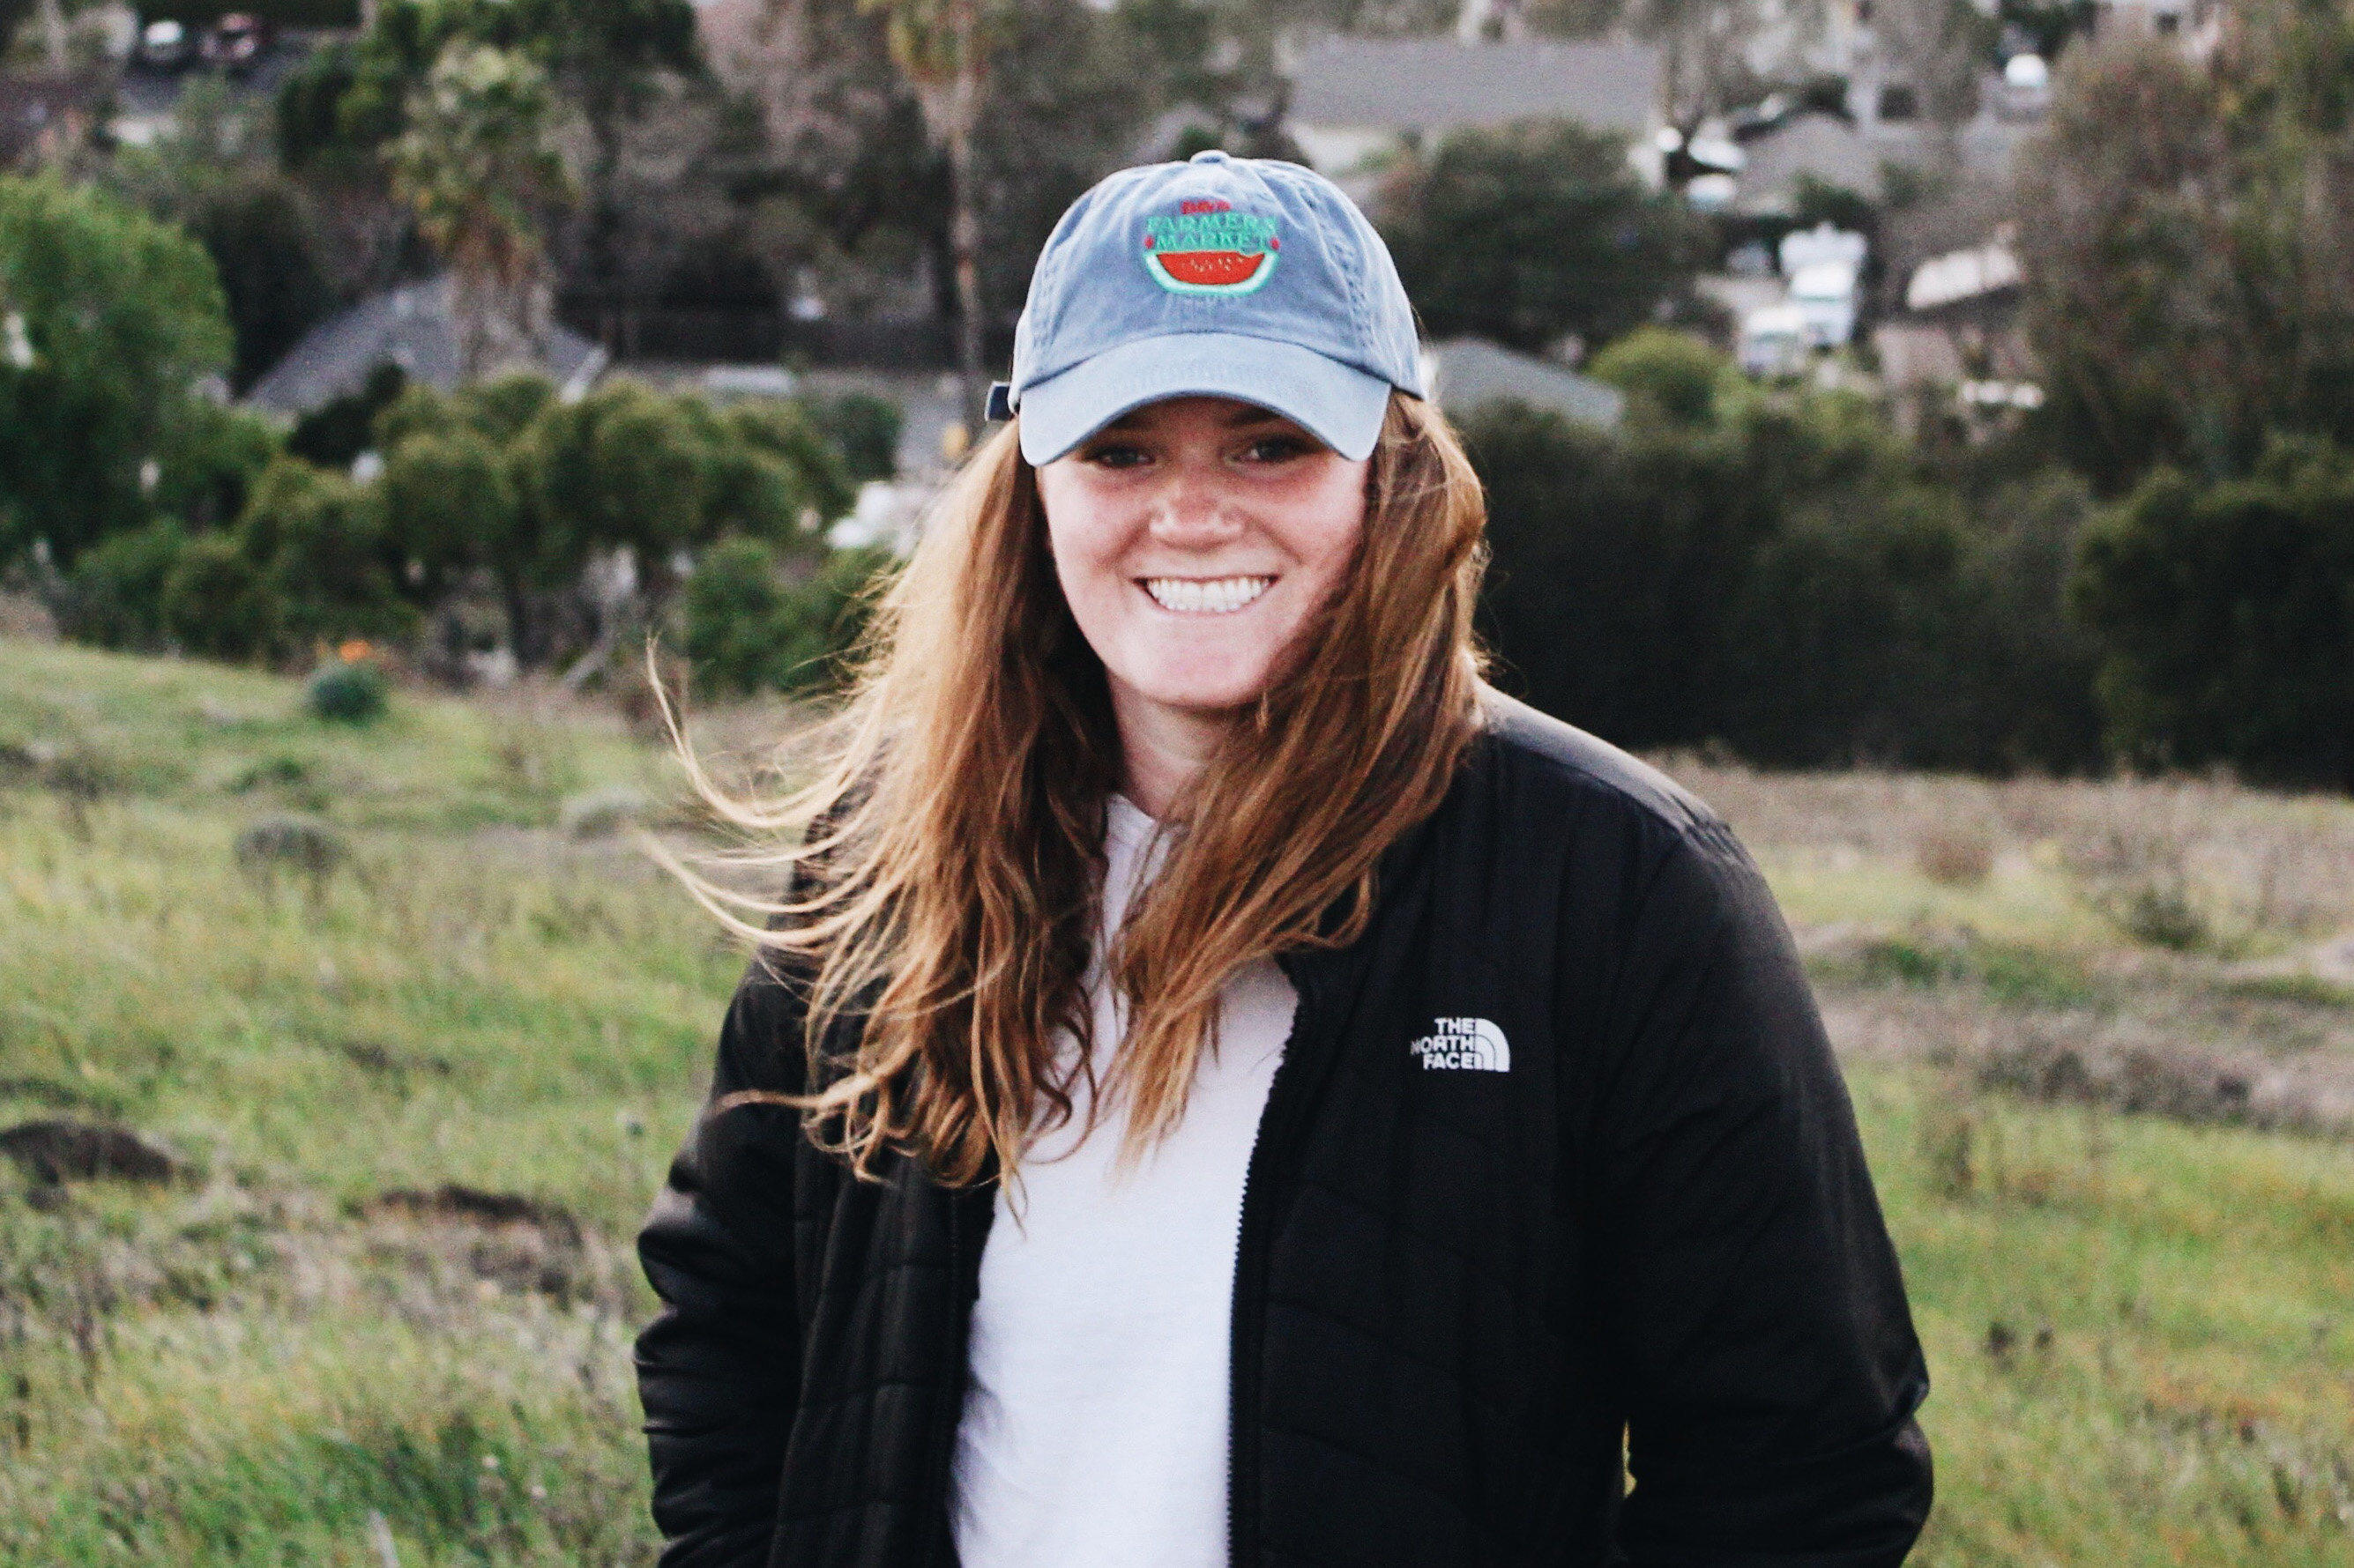 Molly Eichten smiles wearing a blue hat with a watermelon and a black North Face jacket in front of green brush and trees 